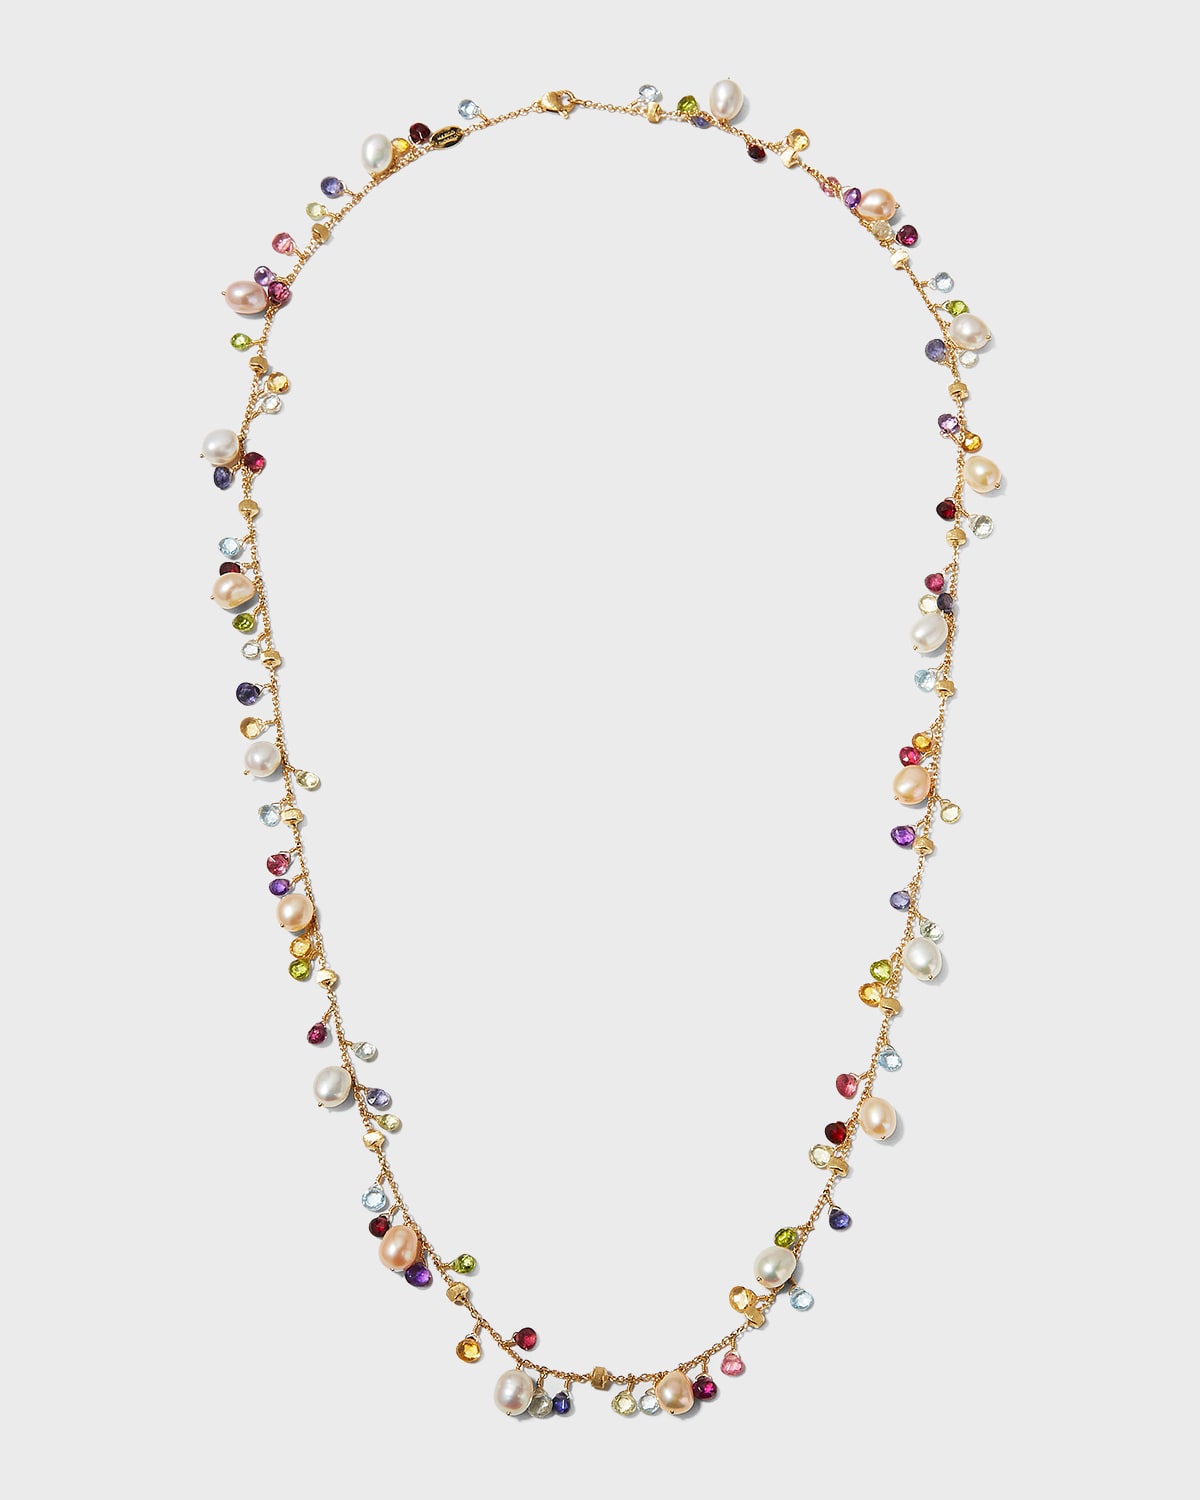 Link chain with T-bar and Amethyst crystals  freshwater pearls ~ 24Kt gold plated chain.